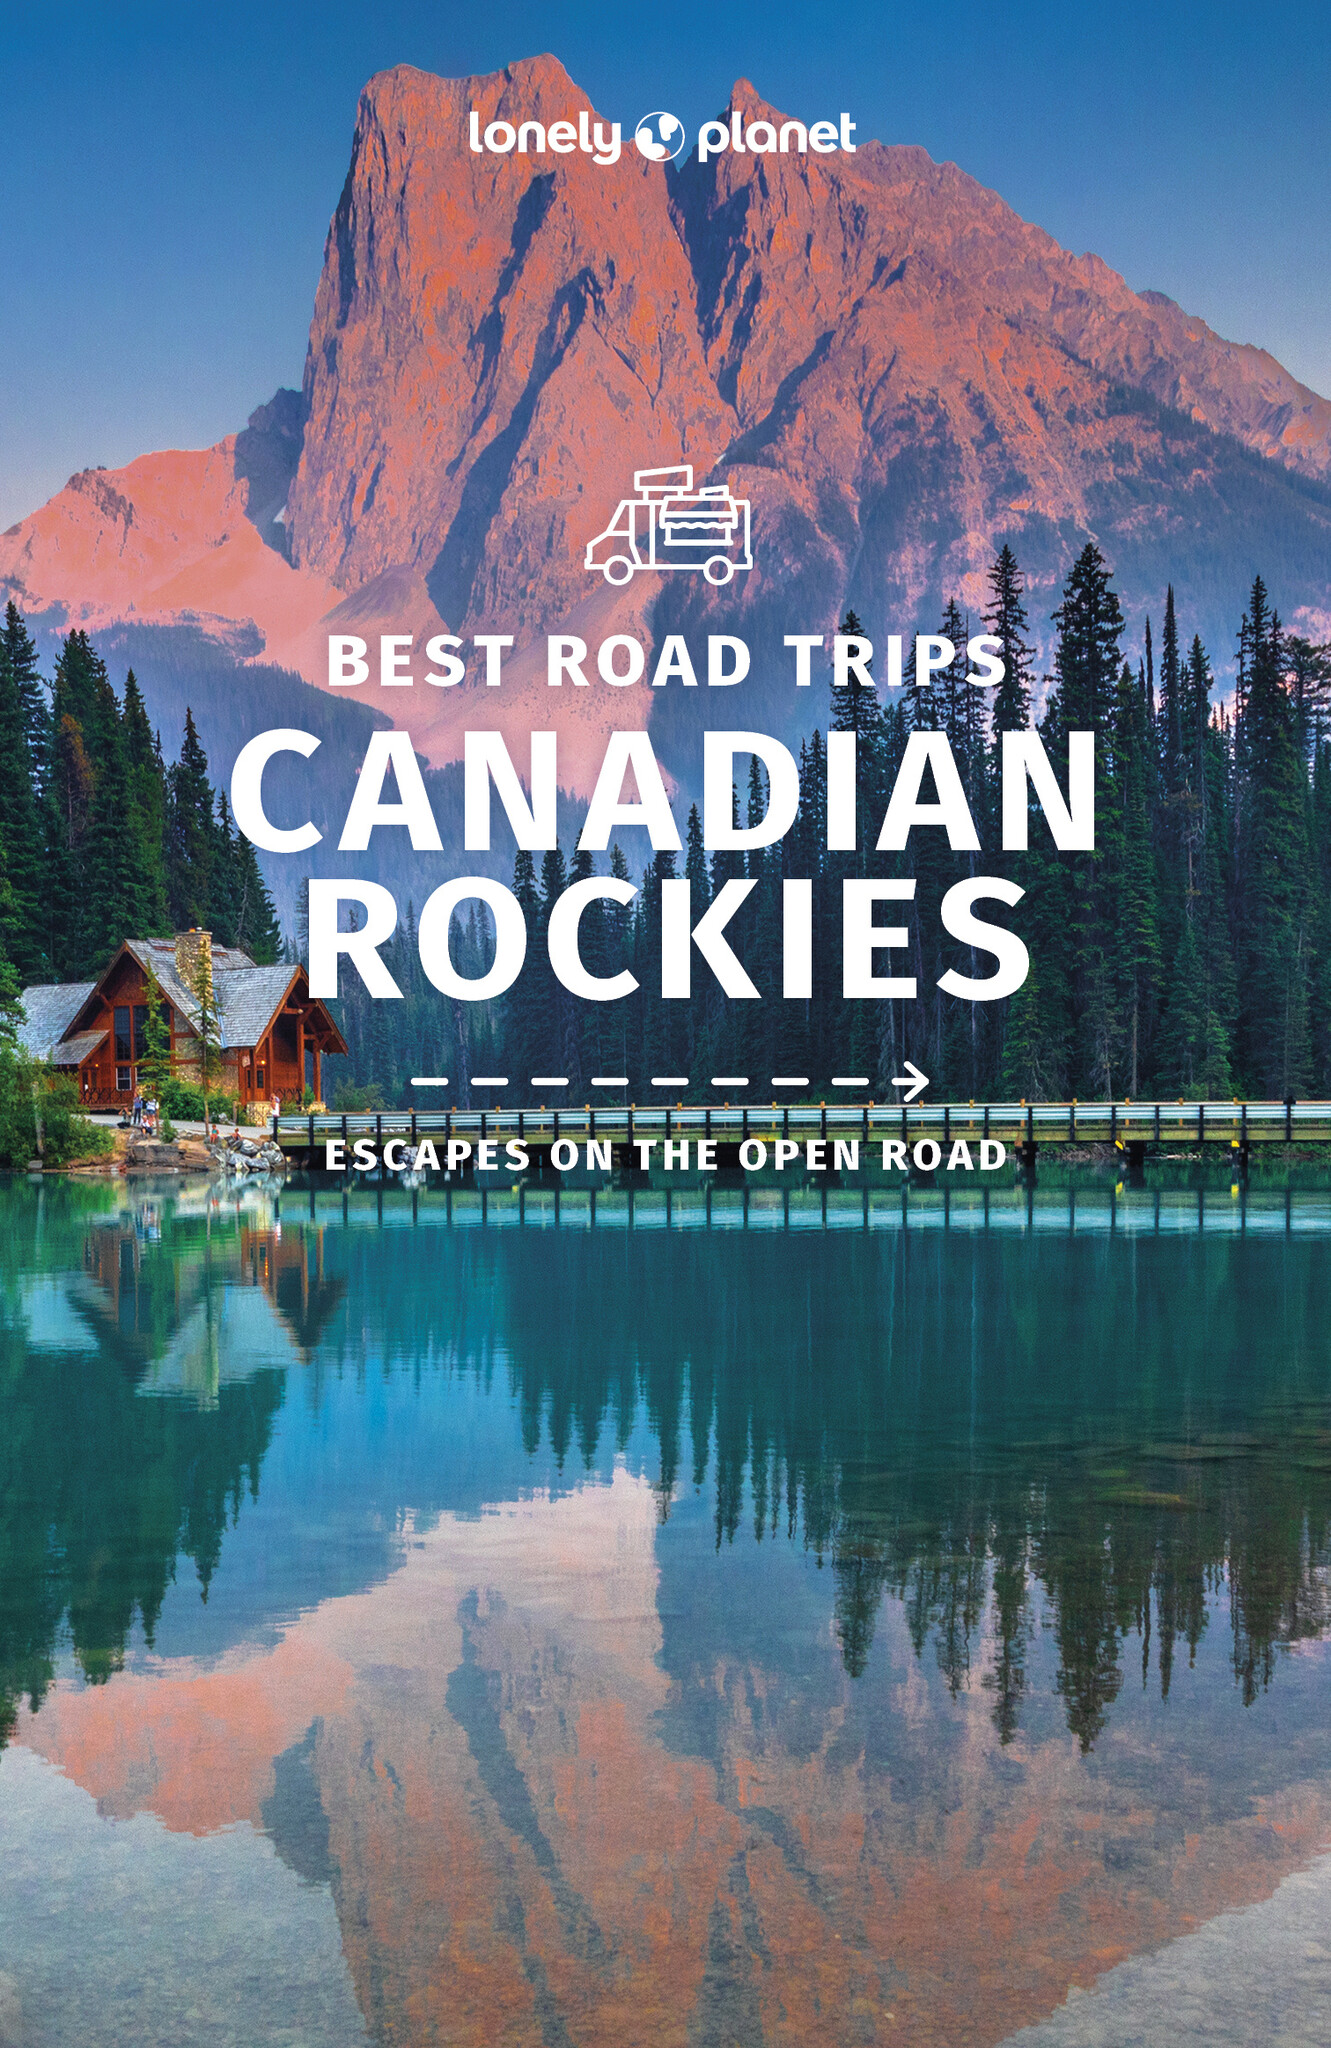 Lonely Planet Best Road Trips Canadian Rockies 1st ed. Lonely Planet, picture 455297807